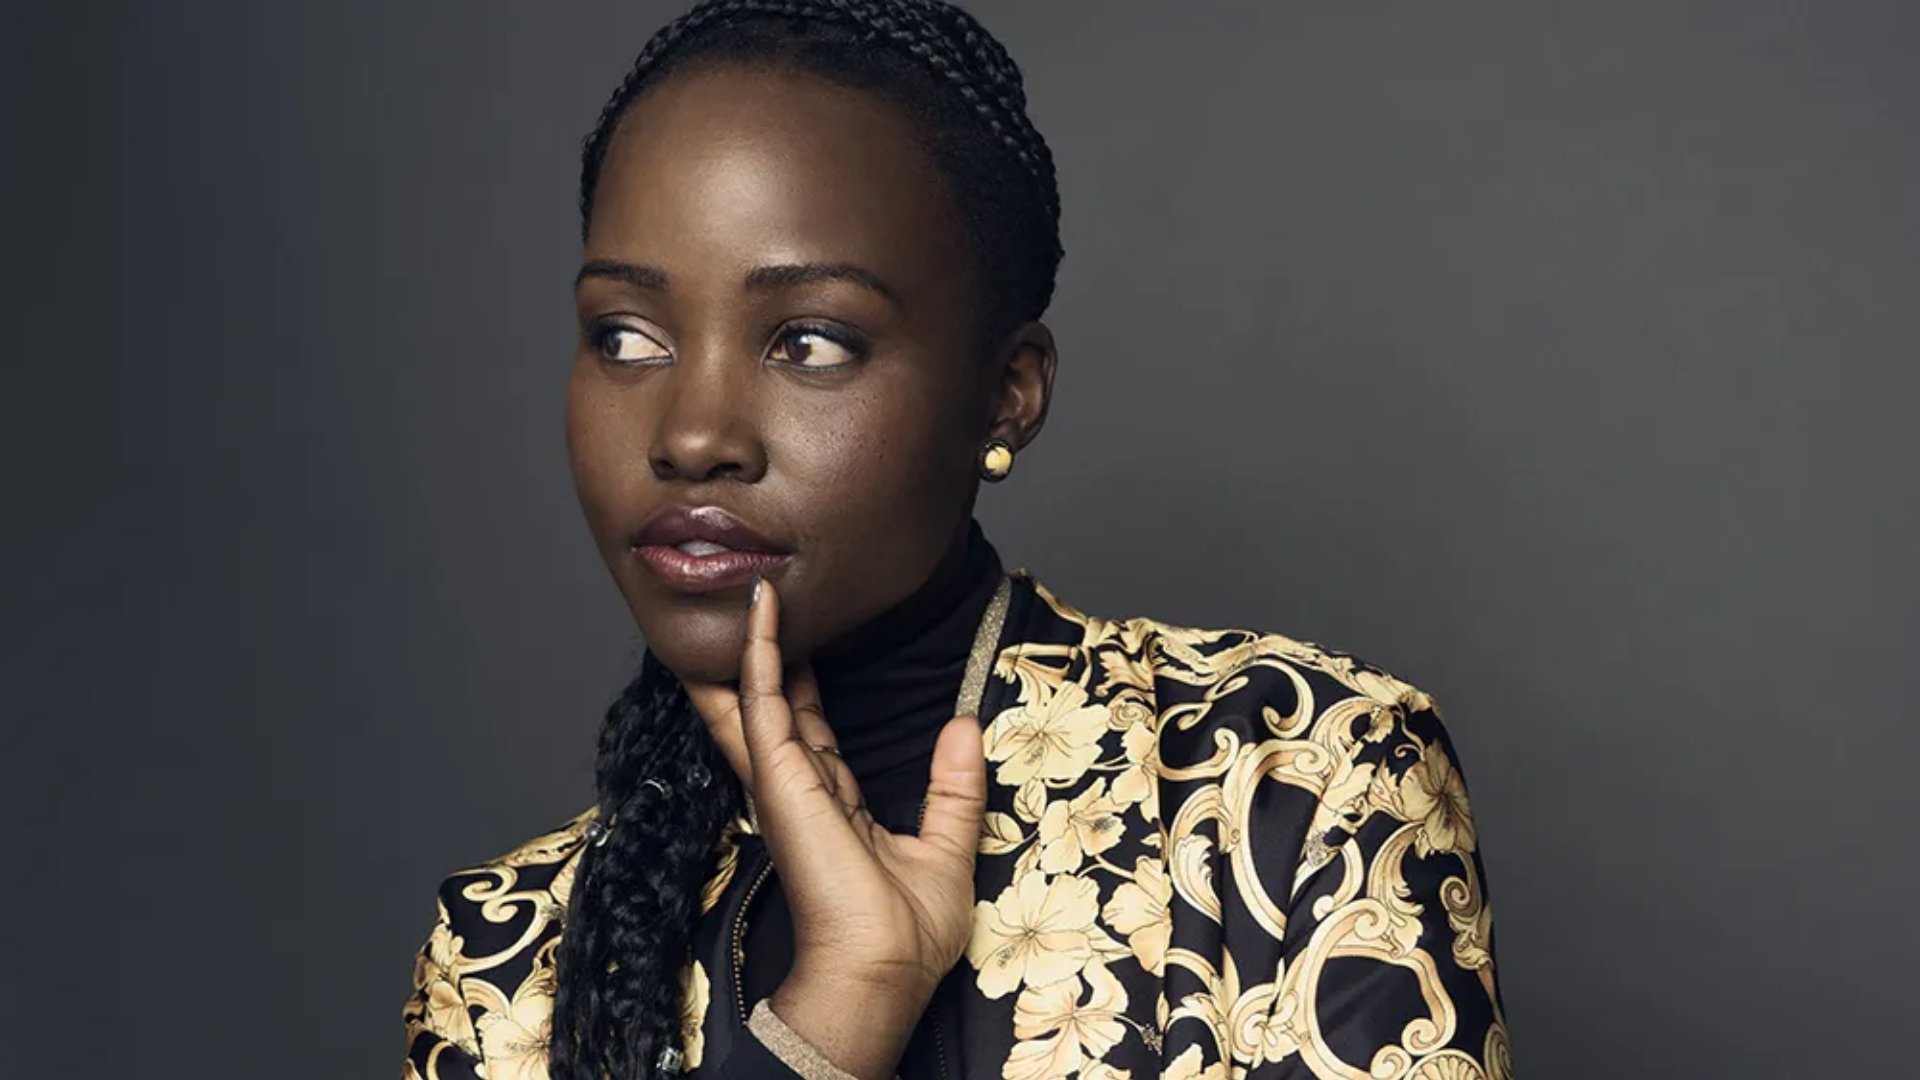 Lupita Nyongo is open to finding love again following her recent breakup